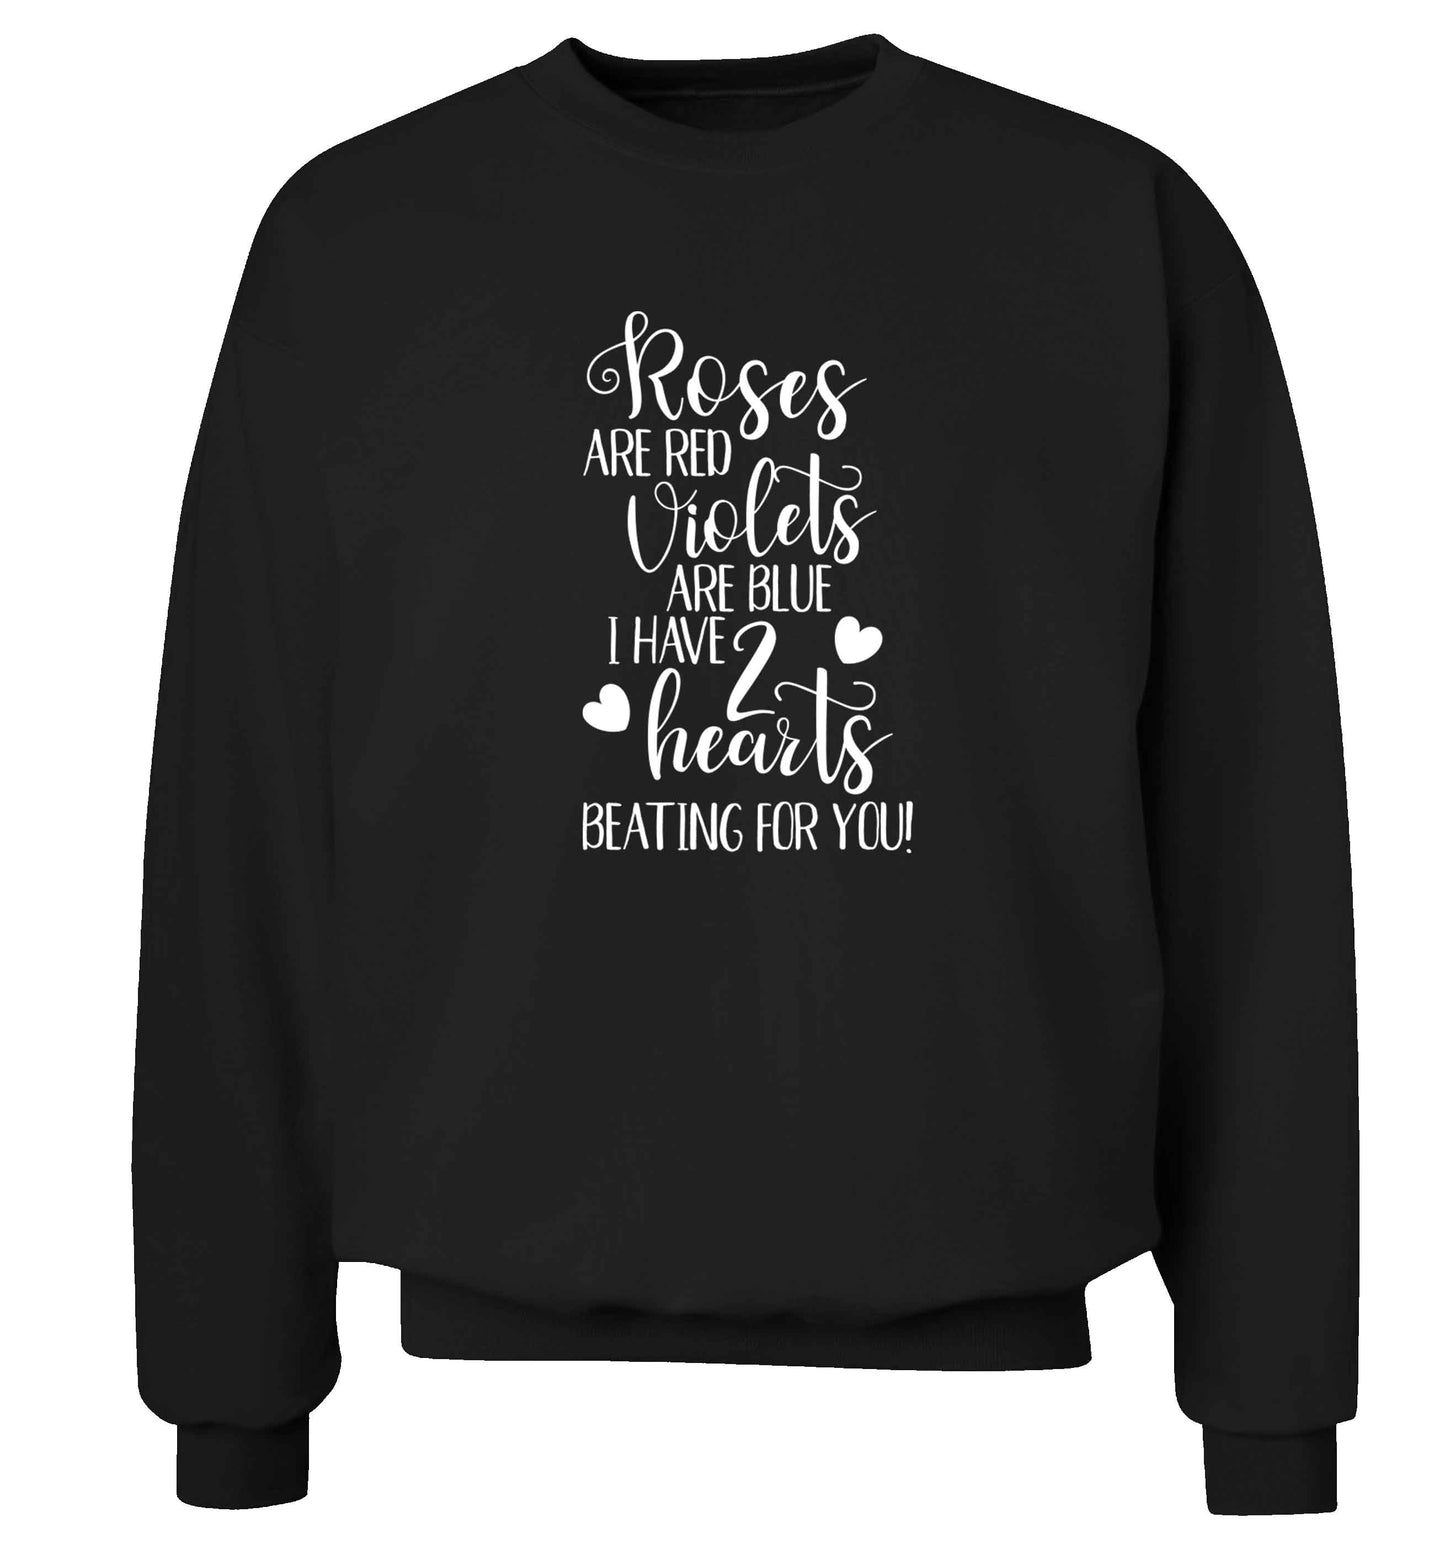 Roses are red violets are blue I have two hearts beating for you Adult's unisex black Sweater 2XL